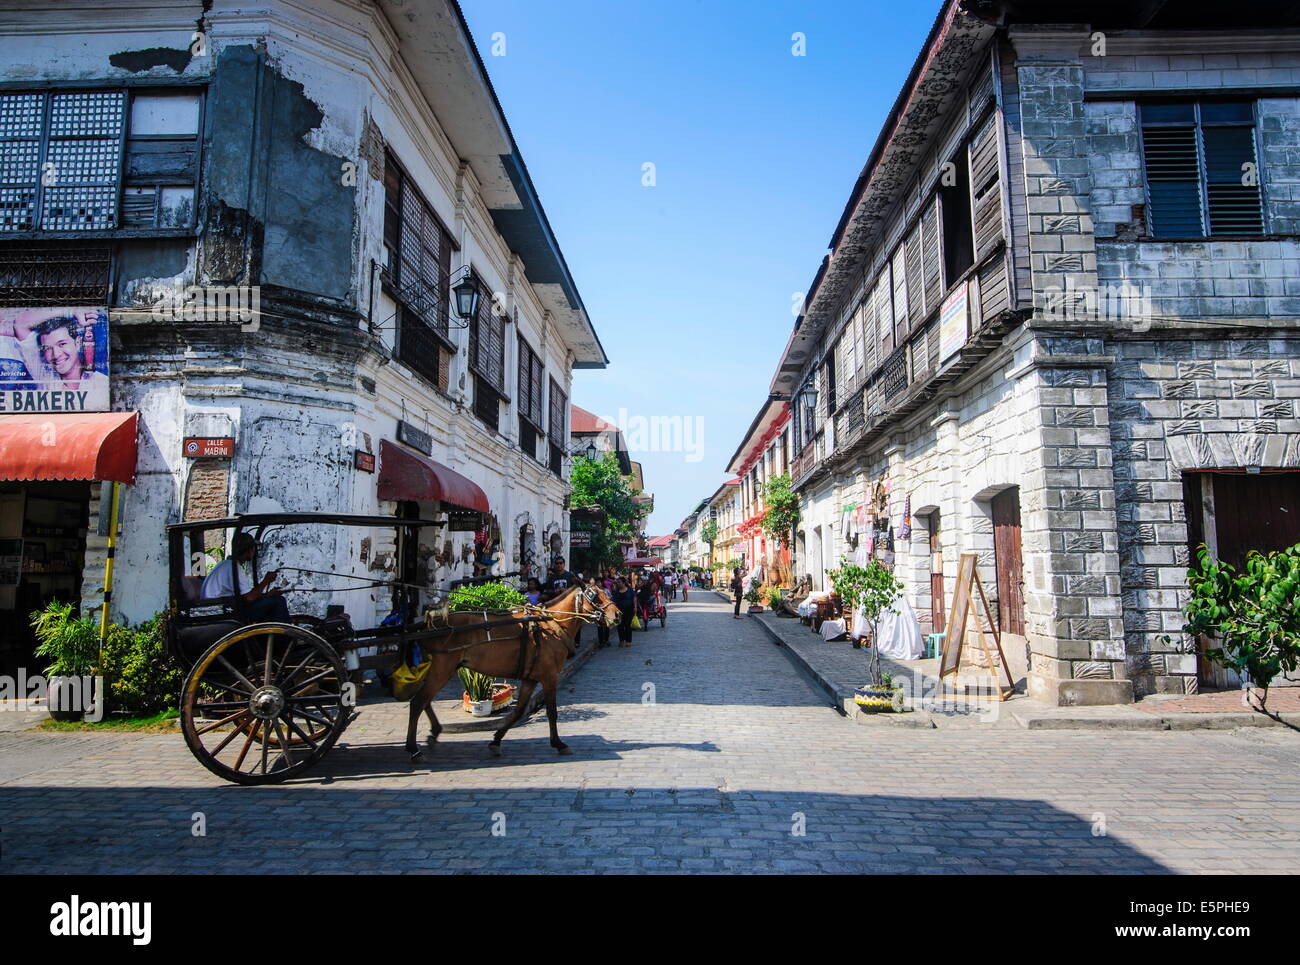 Horse cart riding through the Spanish colonial architecture in Vigan, UNESCO Site, Northern Luzon, Philippines, Southeast Asia Stock Photo